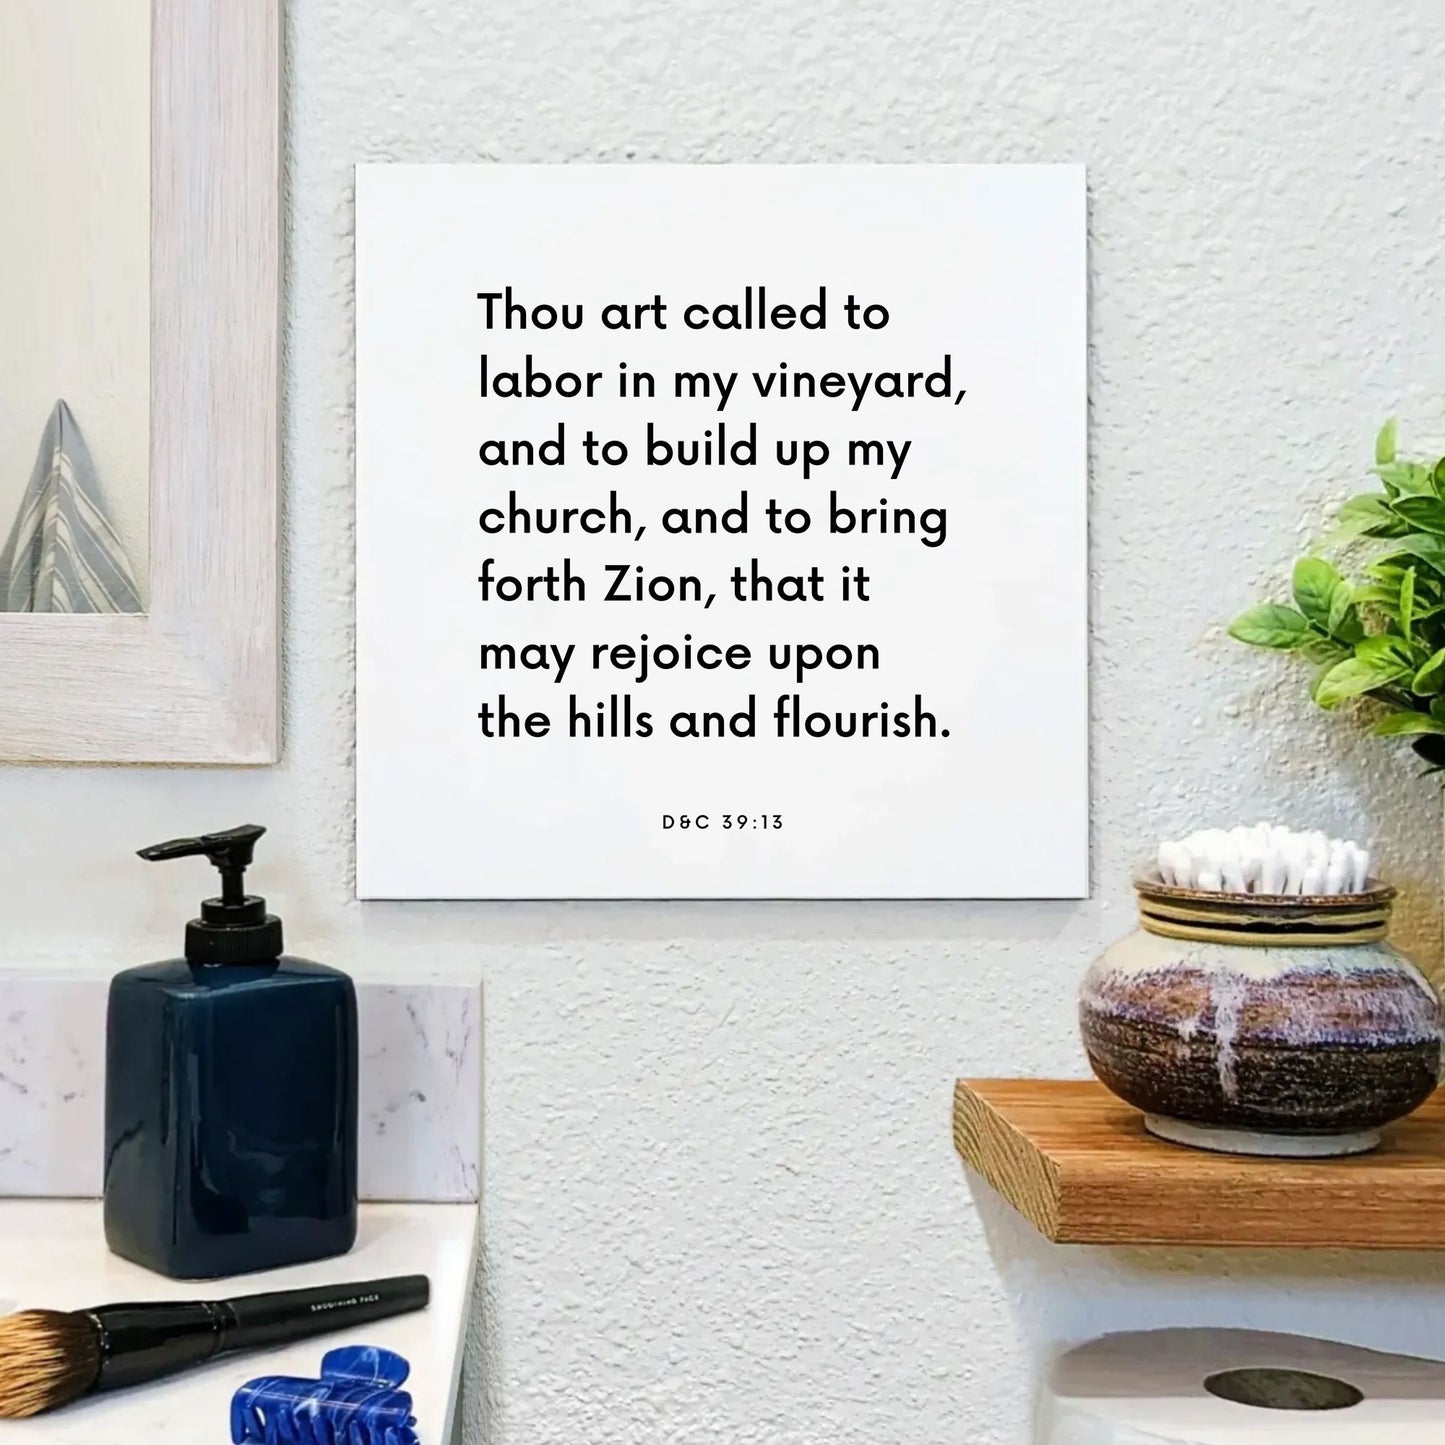 Bathroom mouting of the scripture tile for D&C 39:13 - "Thou art called to labor in my vineyard"